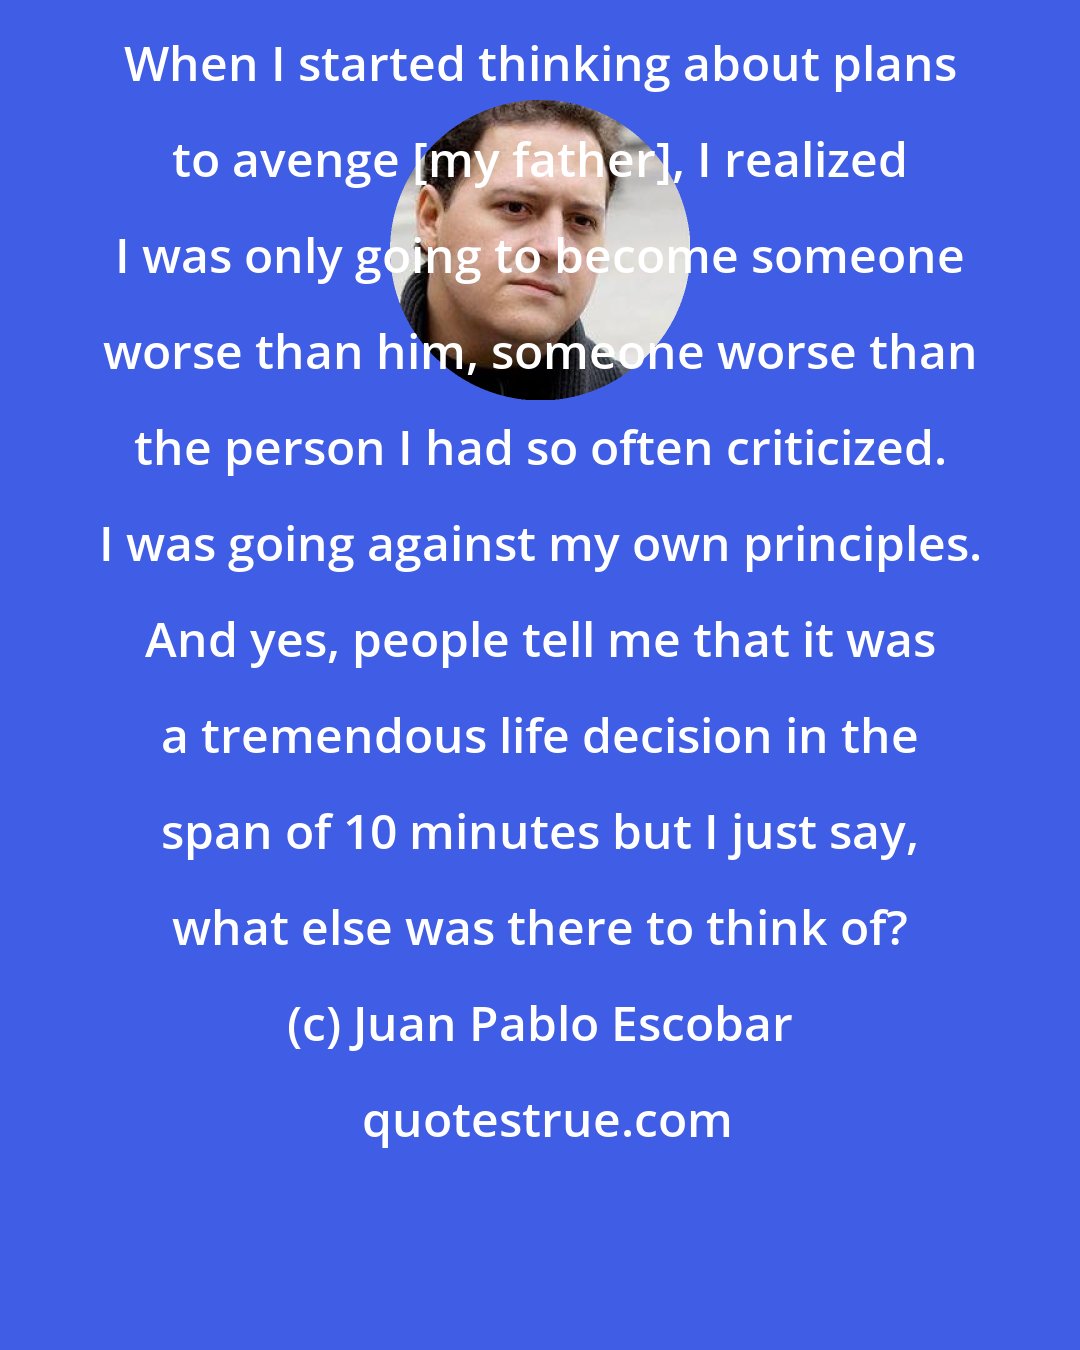 Juan Pablo Escobar: When I started thinking about plans to avenge [my father], I realized I was only going to become someone worse than him, someone worse than the person I had so often criticized. I was going against my own principles. And yes, people tell me that it was a tremendous life decision in the span of 10 minutes but I just say, what else was there to think of?